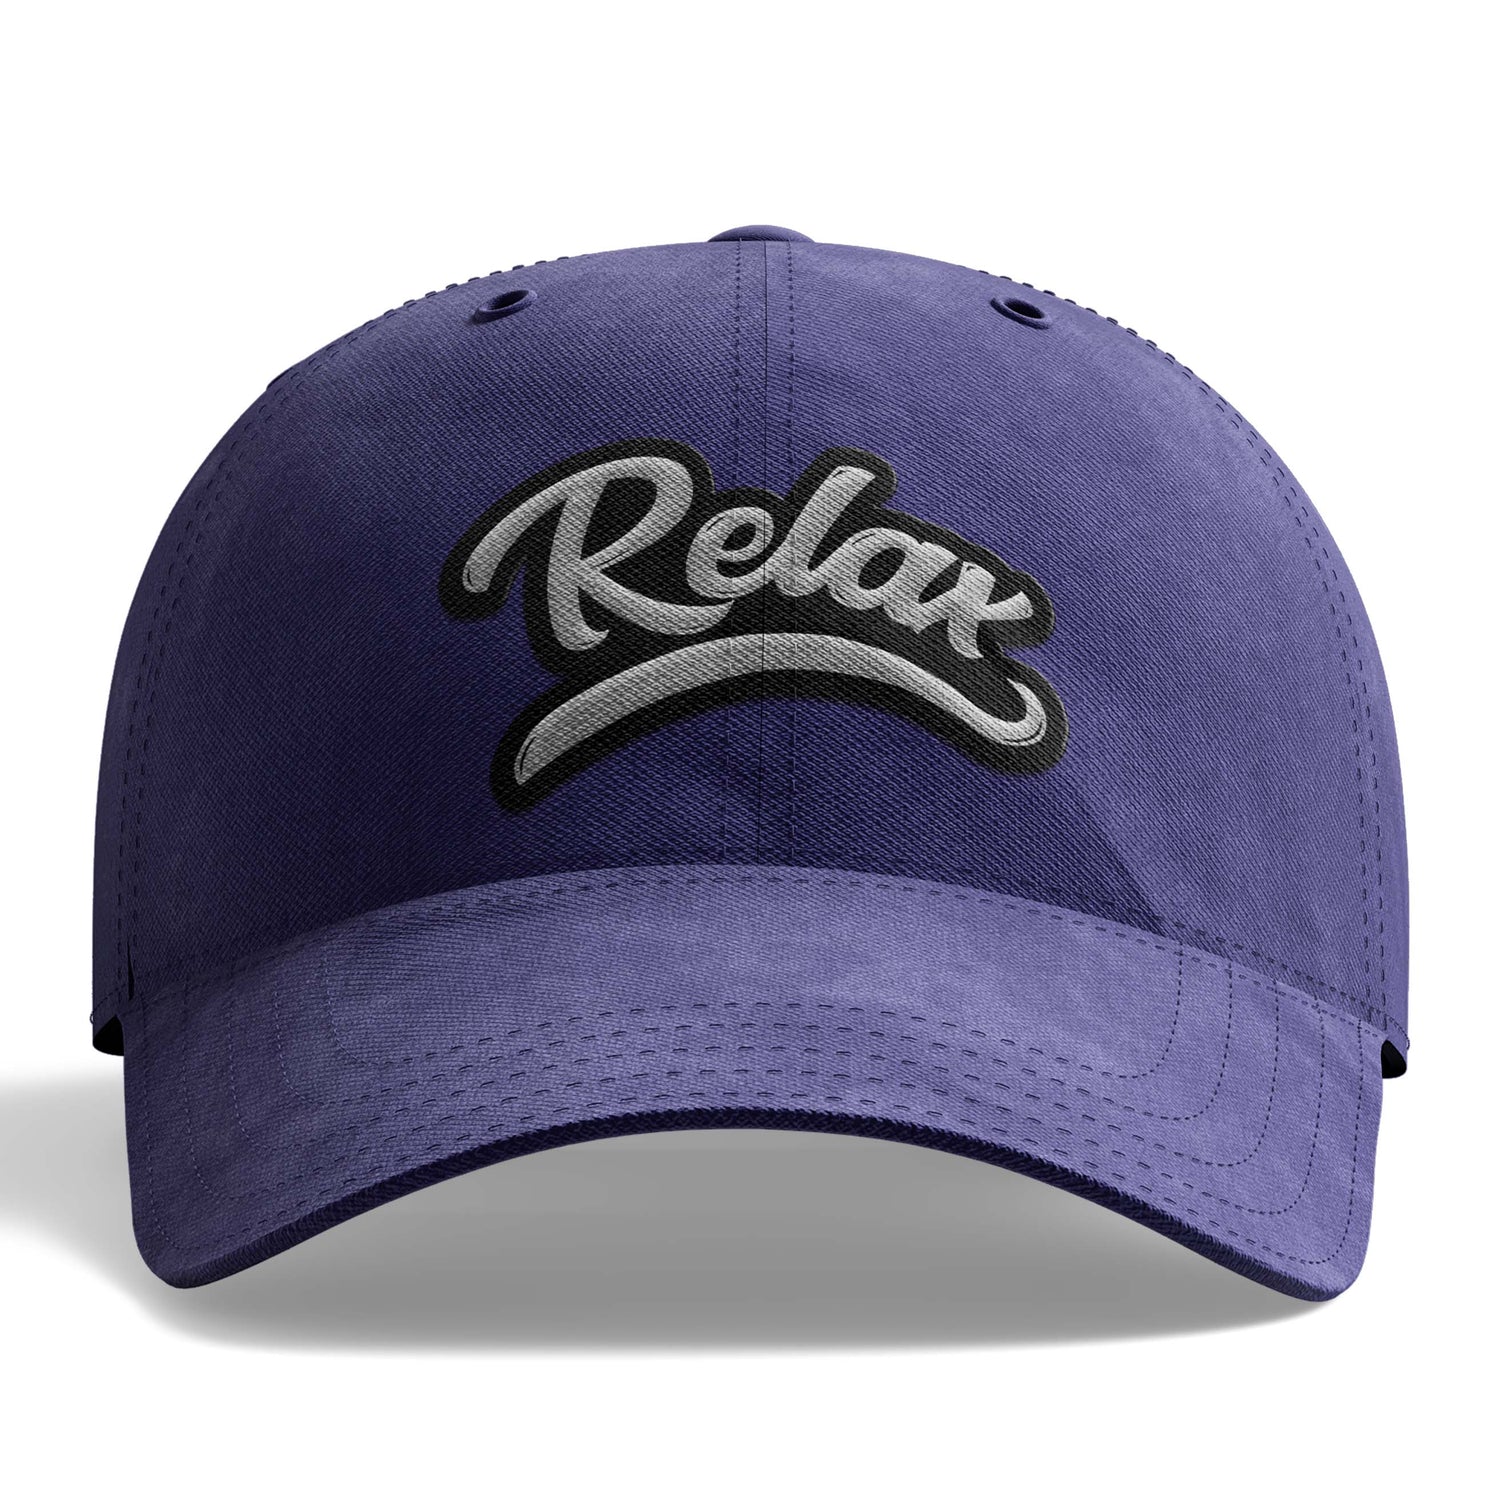 Relax Bent Dad Hat-Shop Relax Collective-